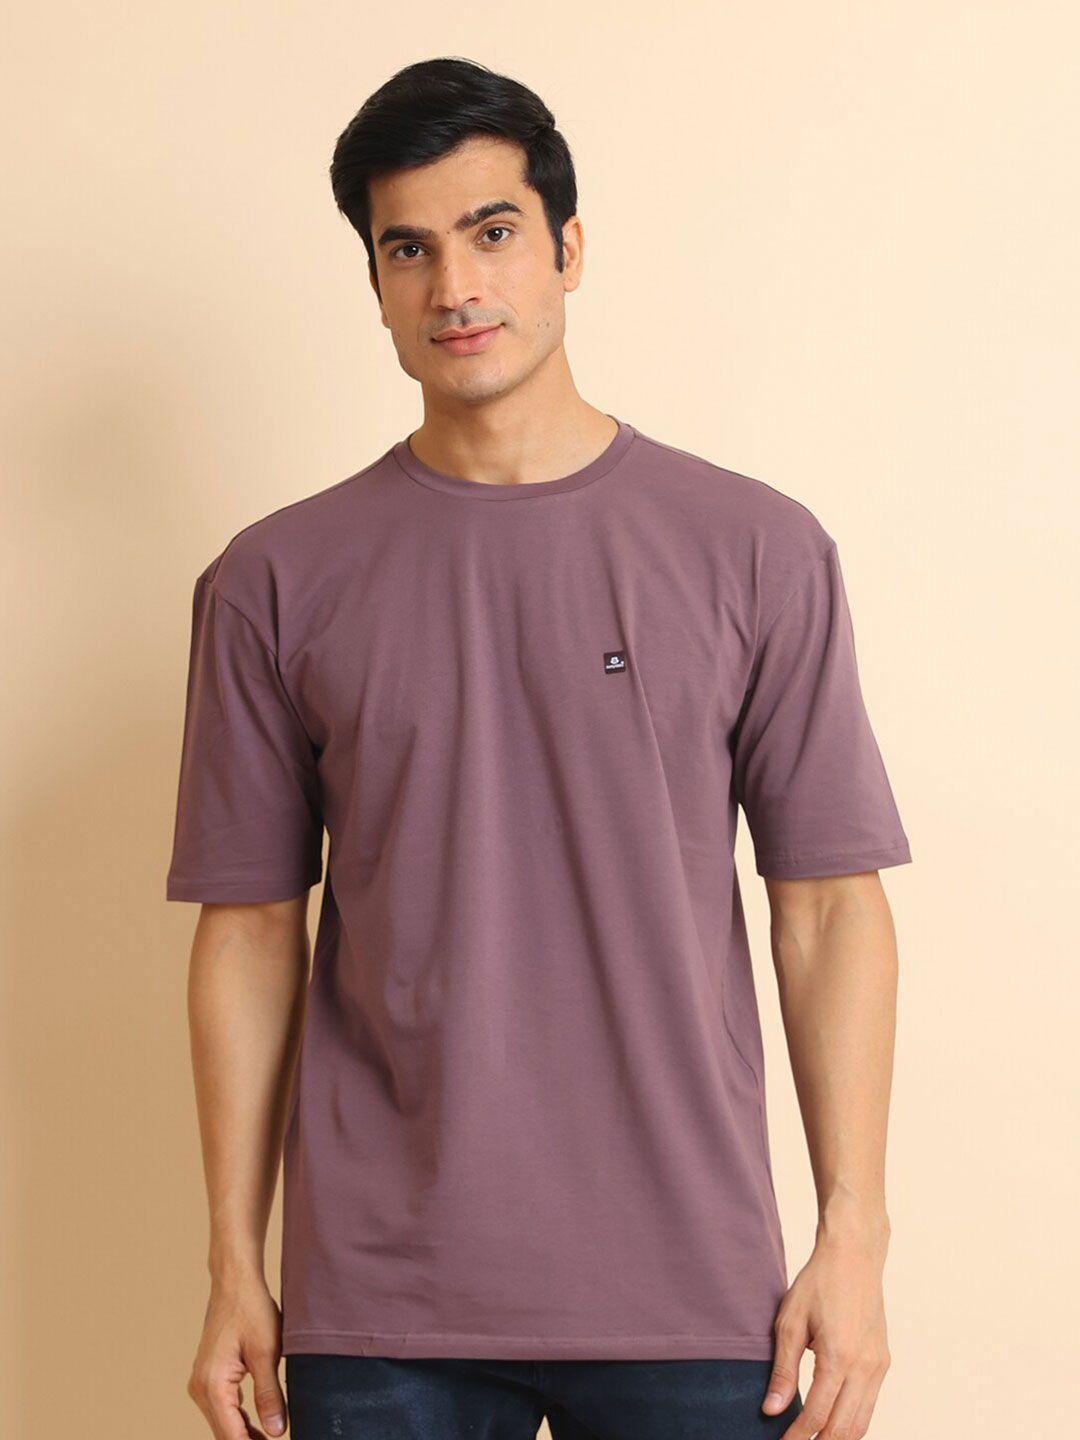 berry blues round neck short sleeves cotton t-shirt